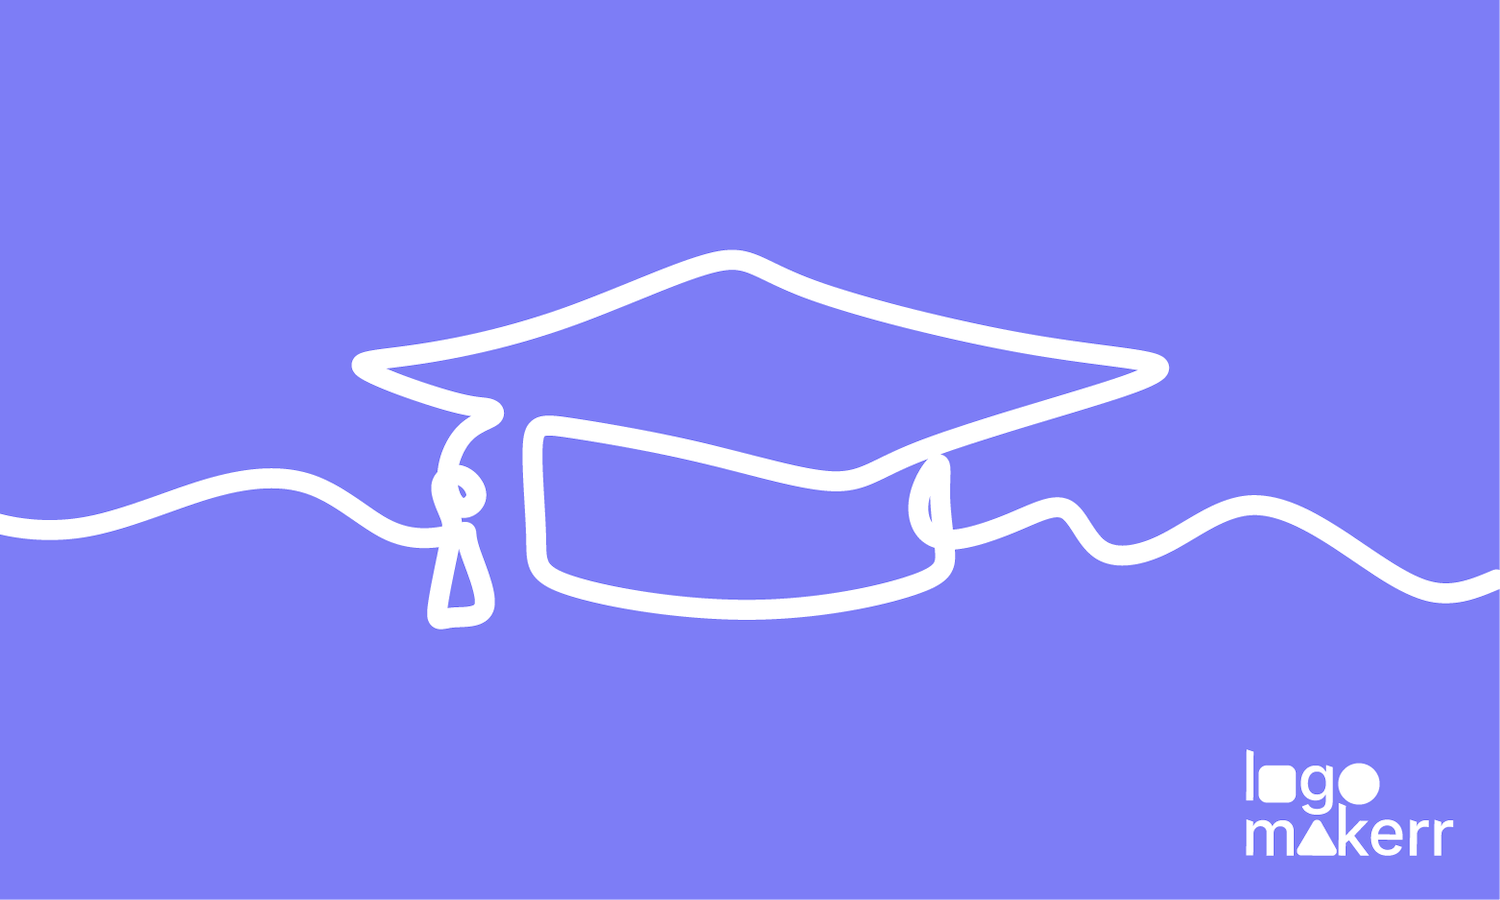 graduation symbols witha a line in one stroke